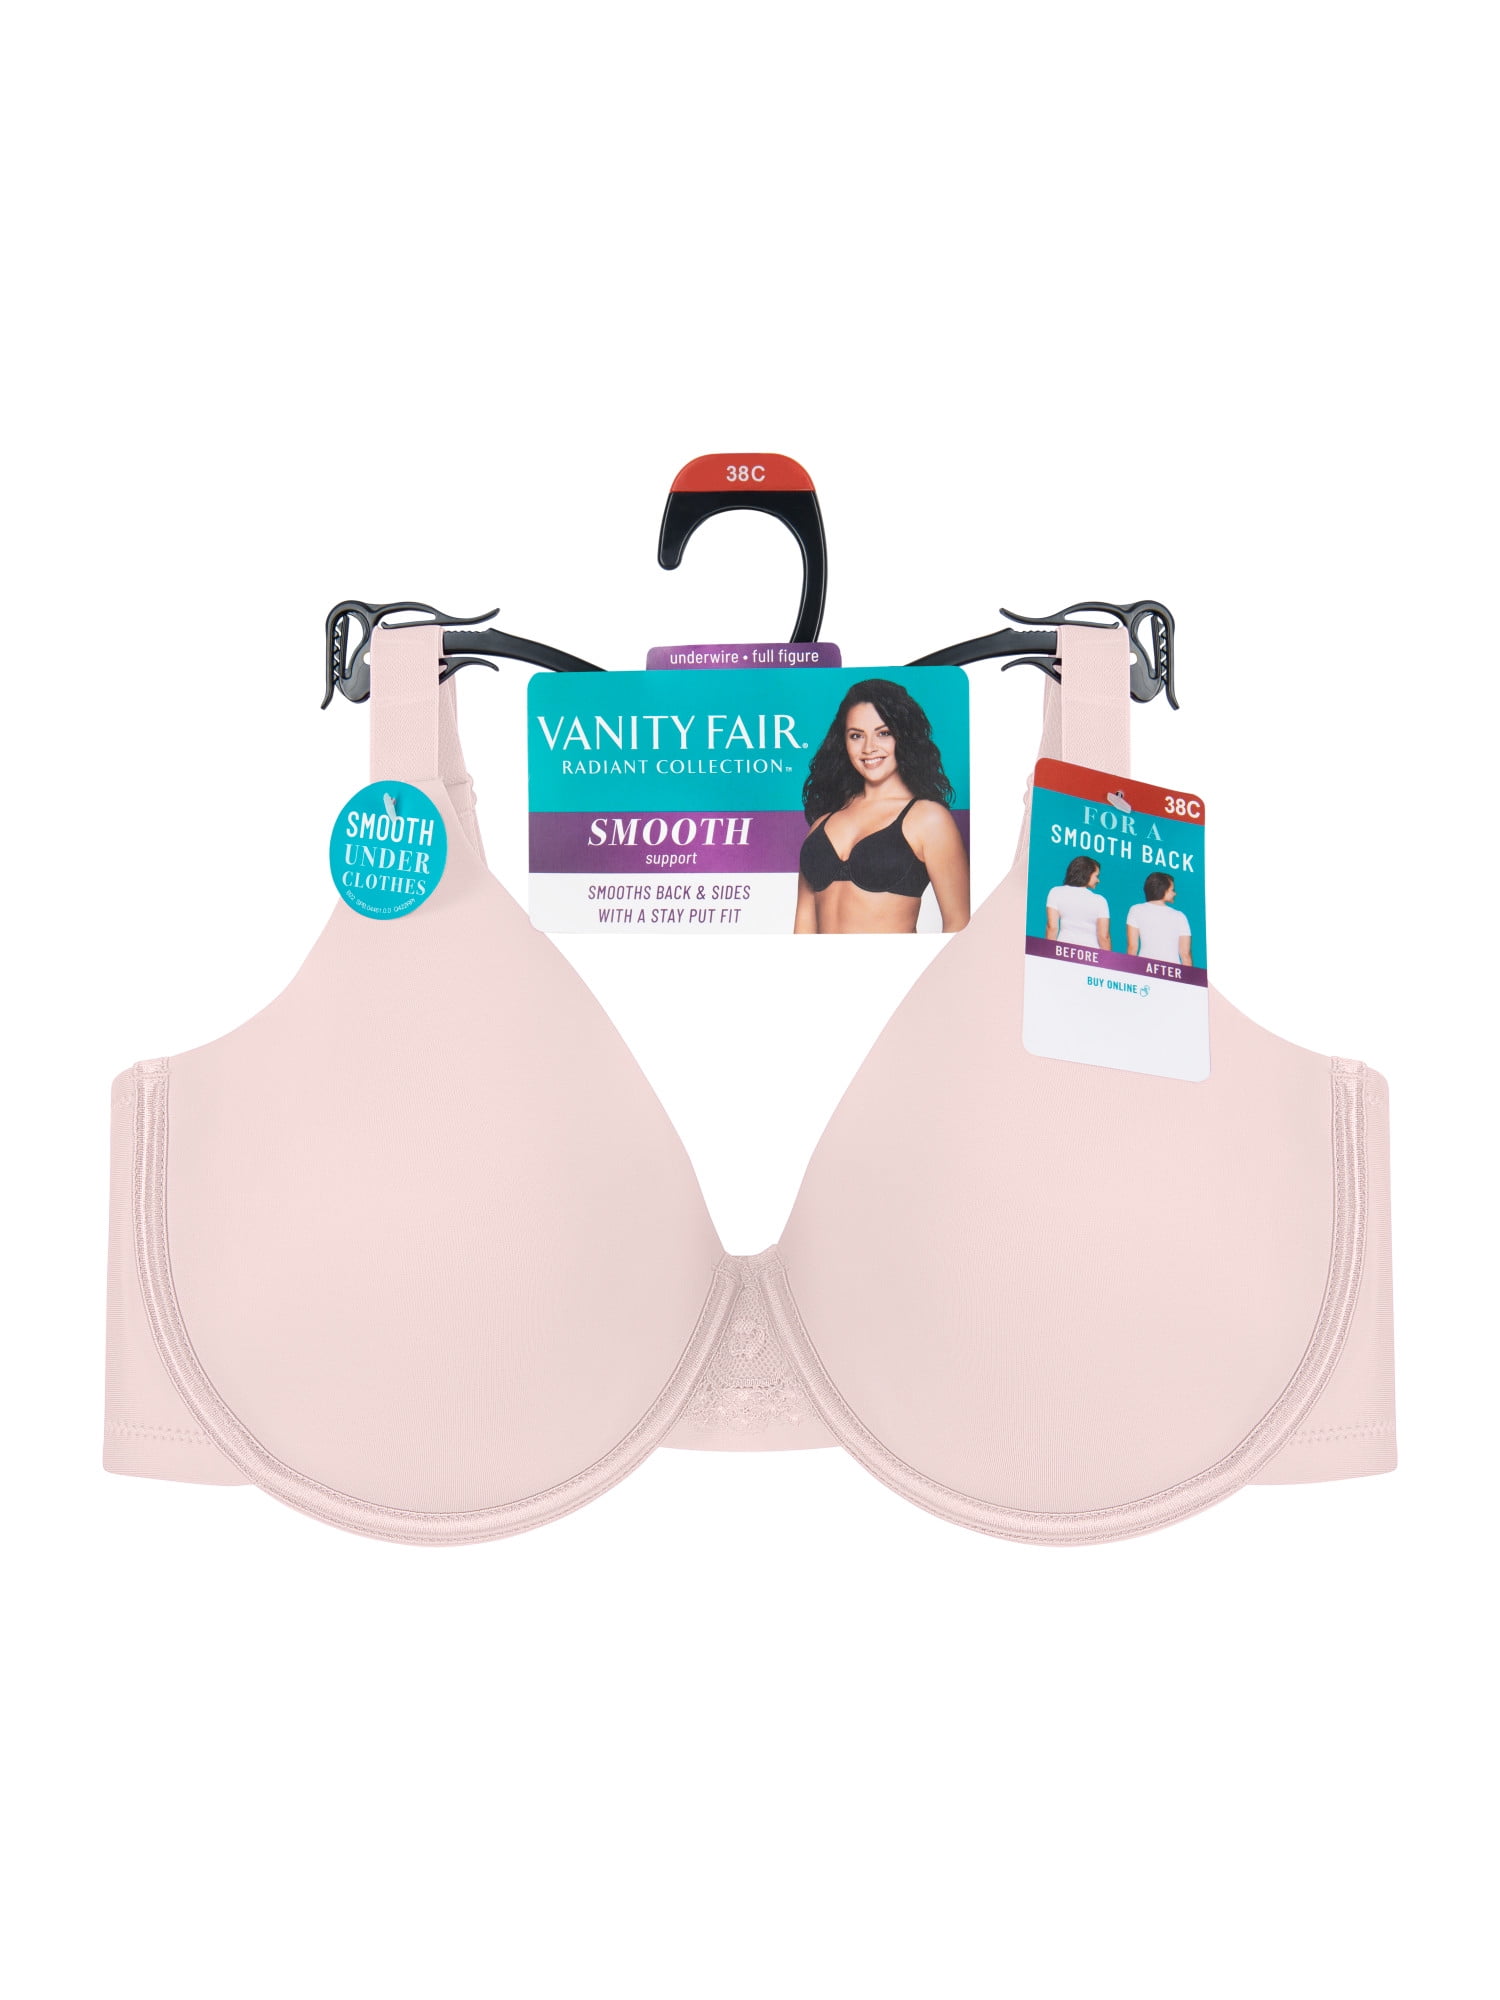 42DDD Vanity Fair Radiant Collection Back Smoothing Underwire Bra 76571